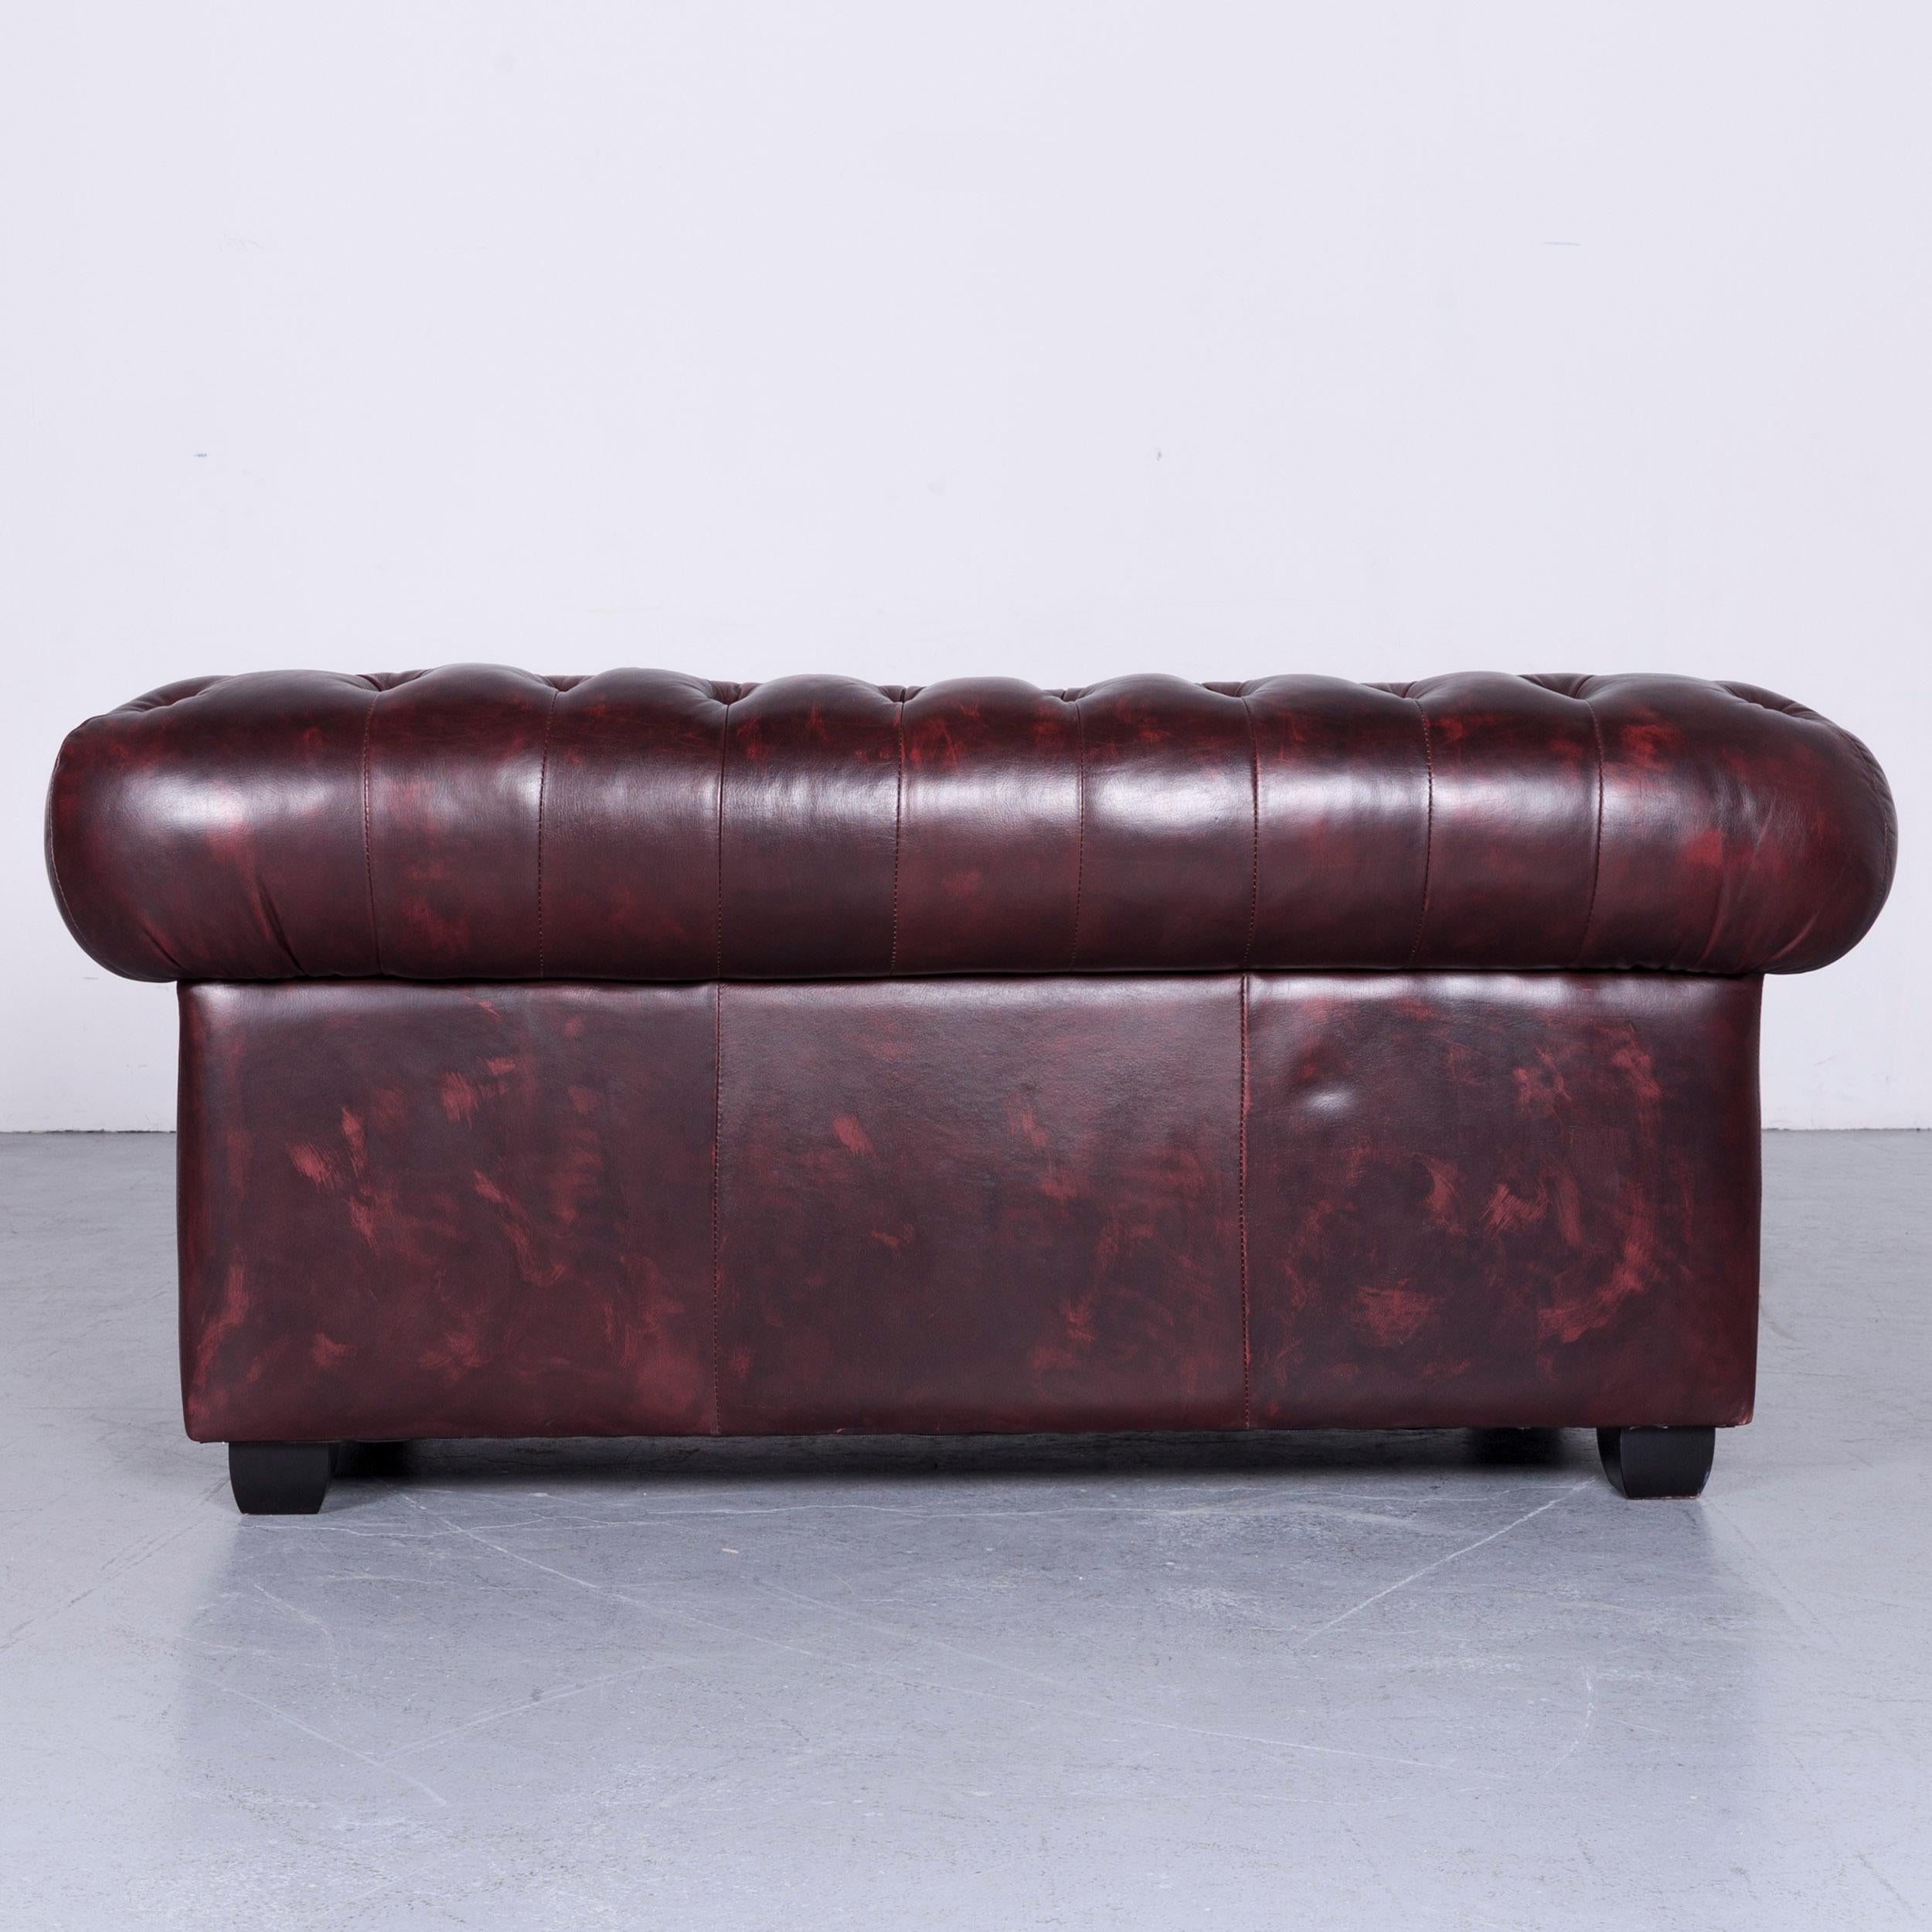 Chesterfield Leather Sofa Brown Two-Seat Couch Vintage Retro 4